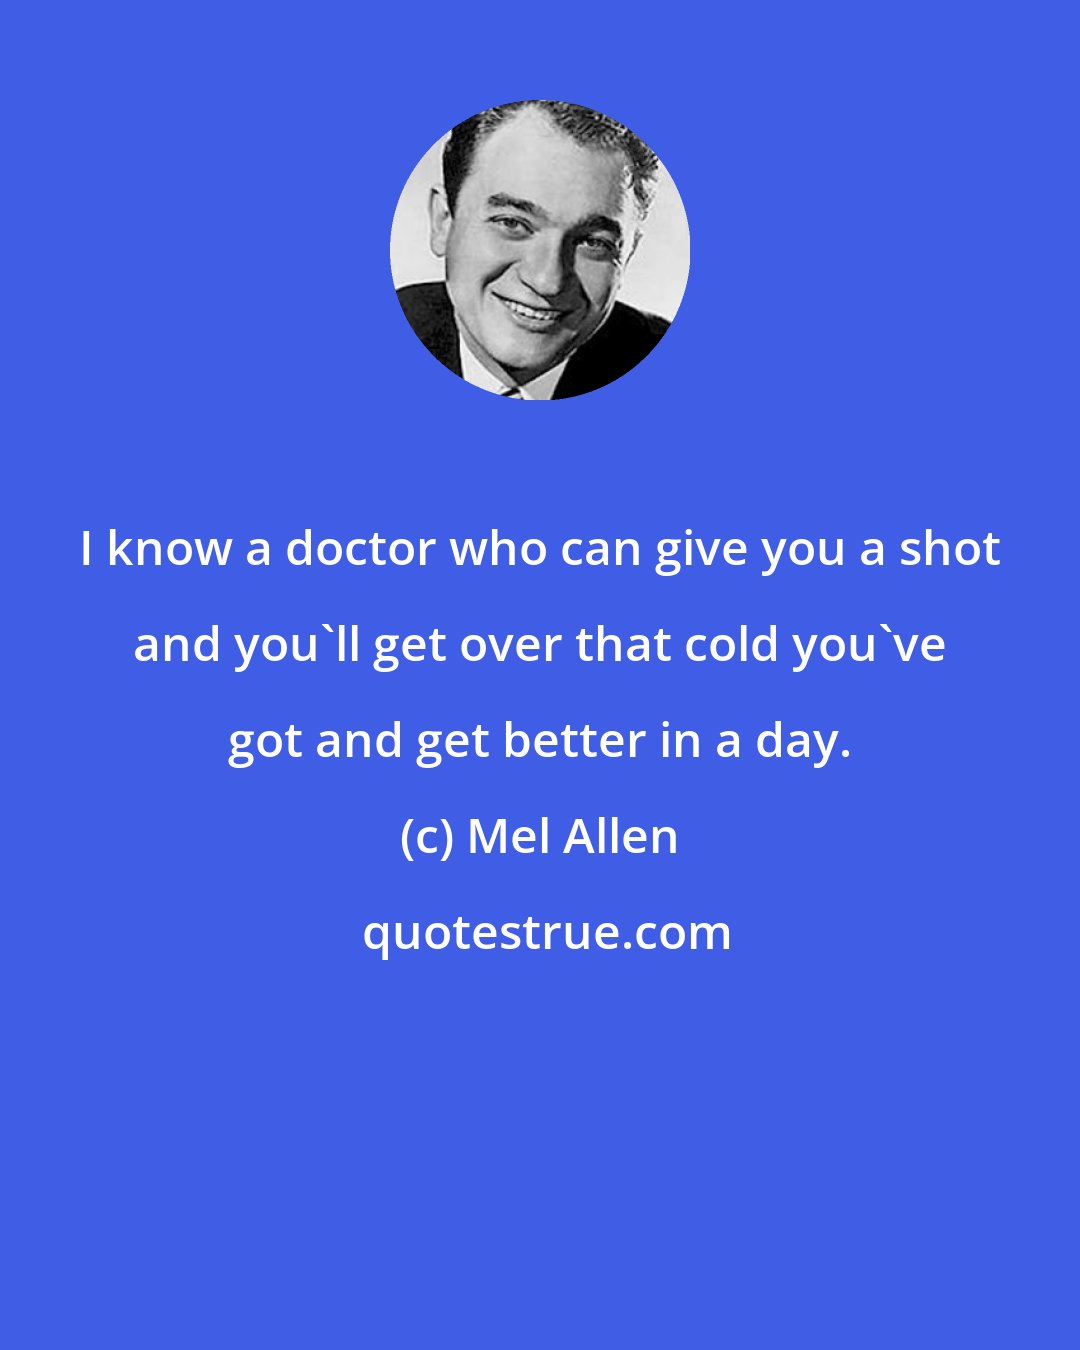 Mel Allen: I know a doctor who can give you a shot and you'll get over that cold you've got and get better in a day.